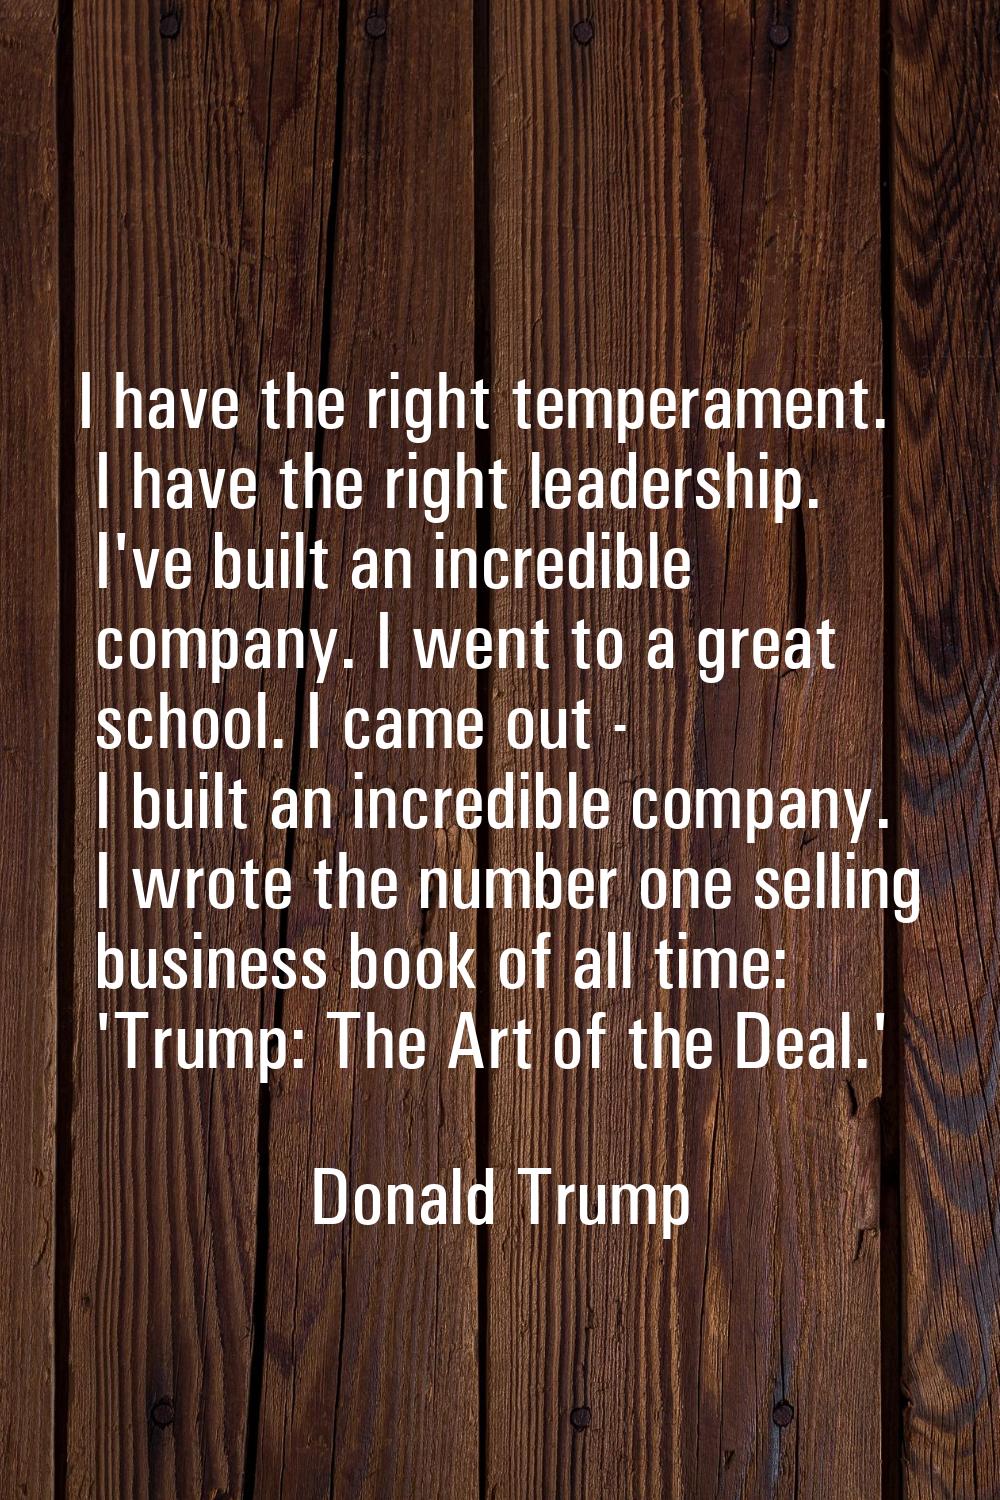 I have the right temperament. I have the right leadership. I've built an incredible company. I went